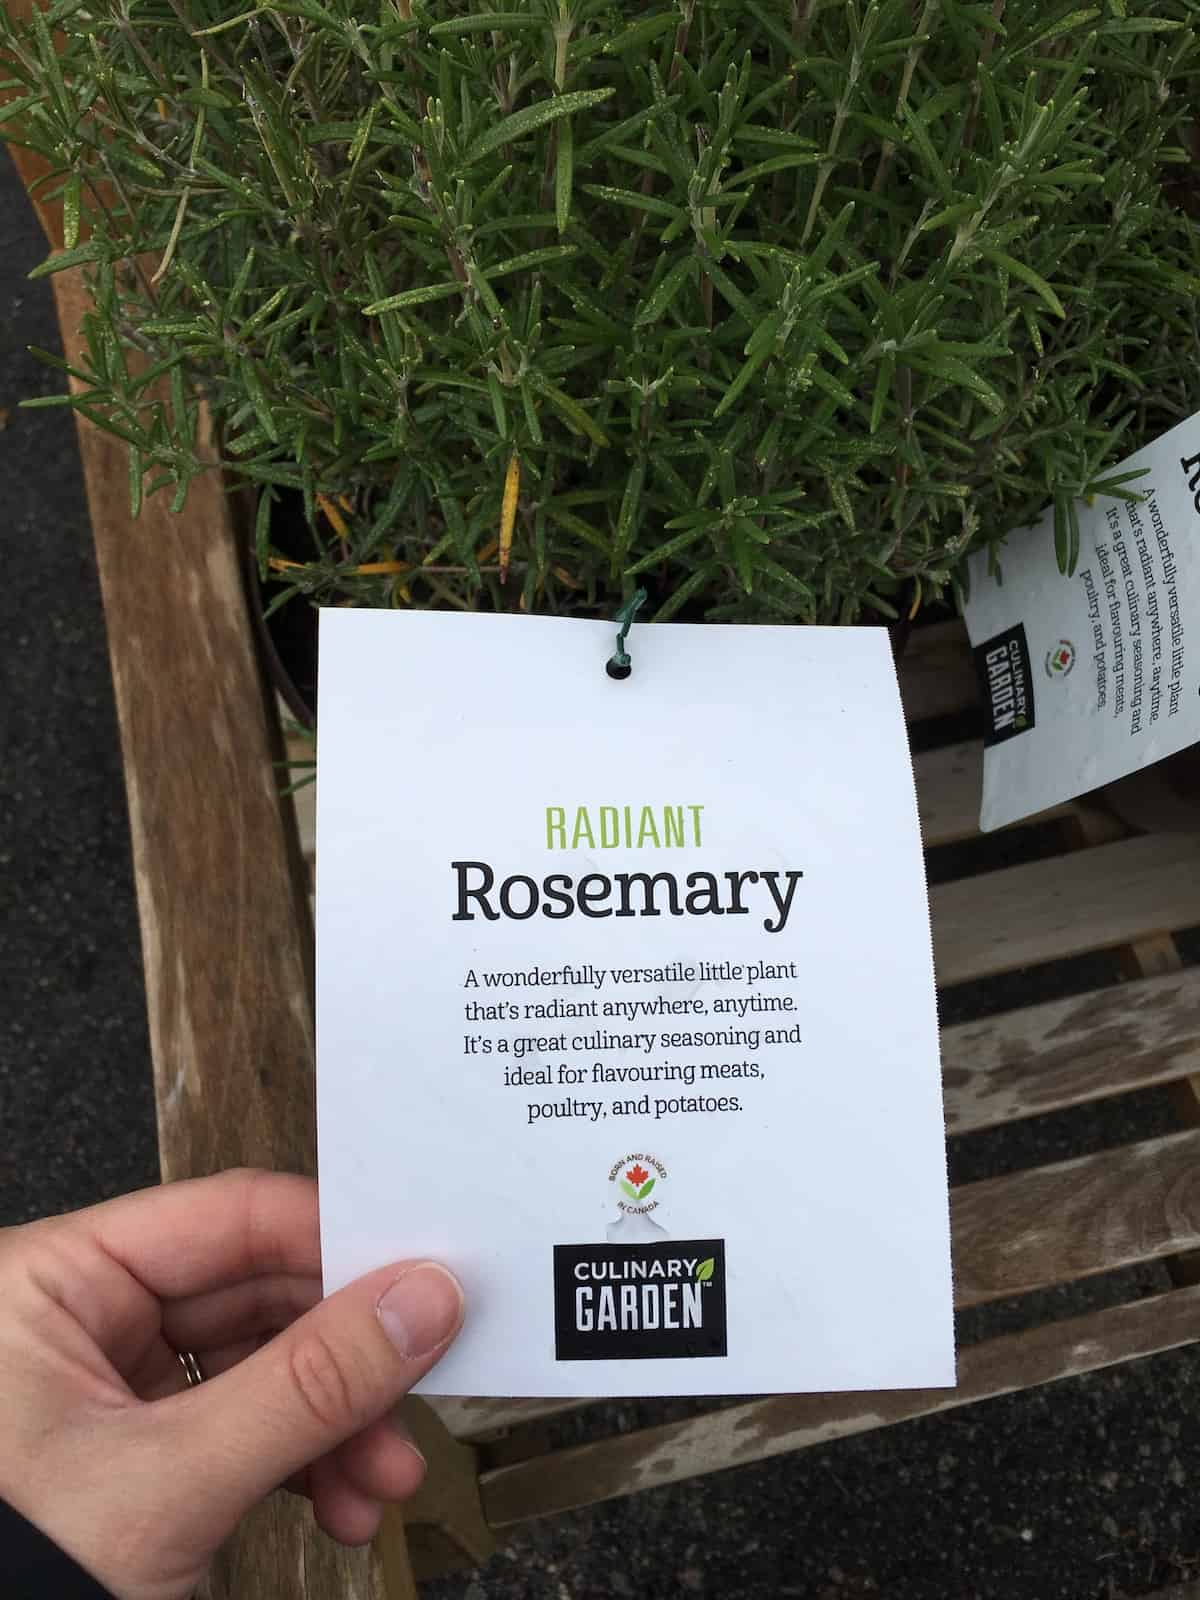 Tag on rosemary plant in the chefs herb garden